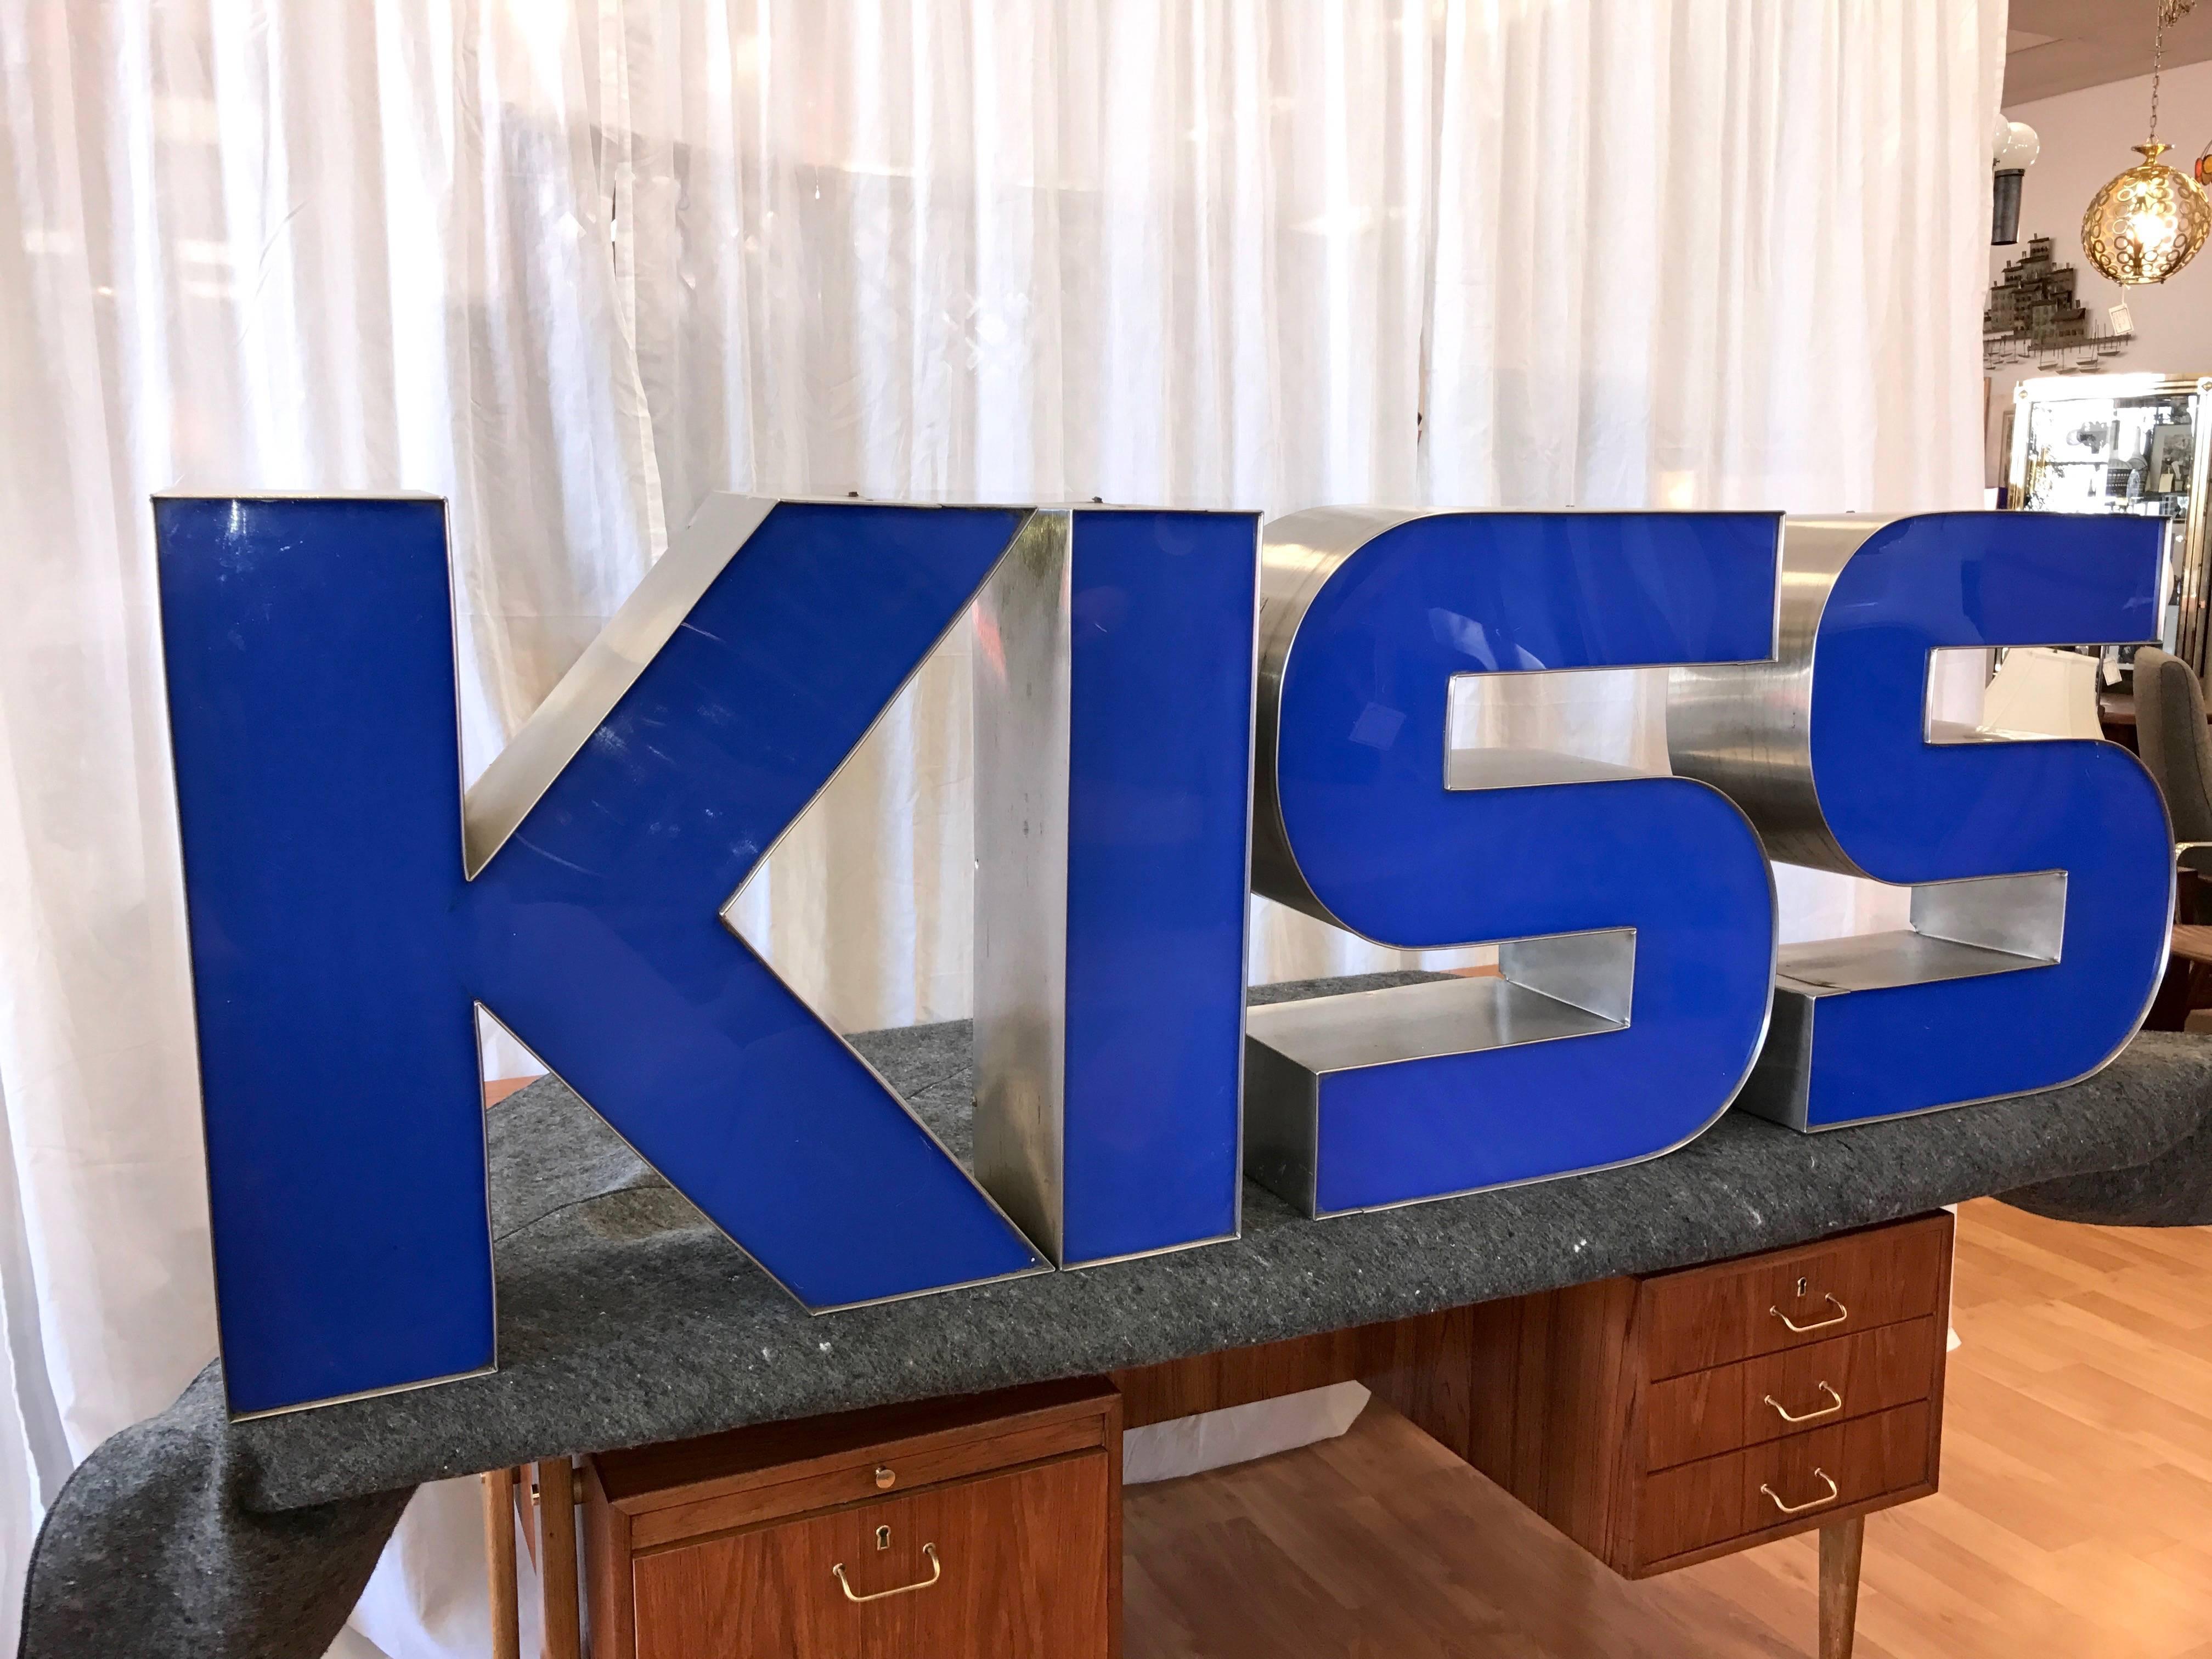 A set of four large vintage indoor or outdoor metal and acrylic signage letters that spell “KISS” by Tennessee-based Plasti-Line Inc.

Bold, graphic letters have brushed sheet metal frames and royal blue plexiglass faces. Deep, sturdy, and stable